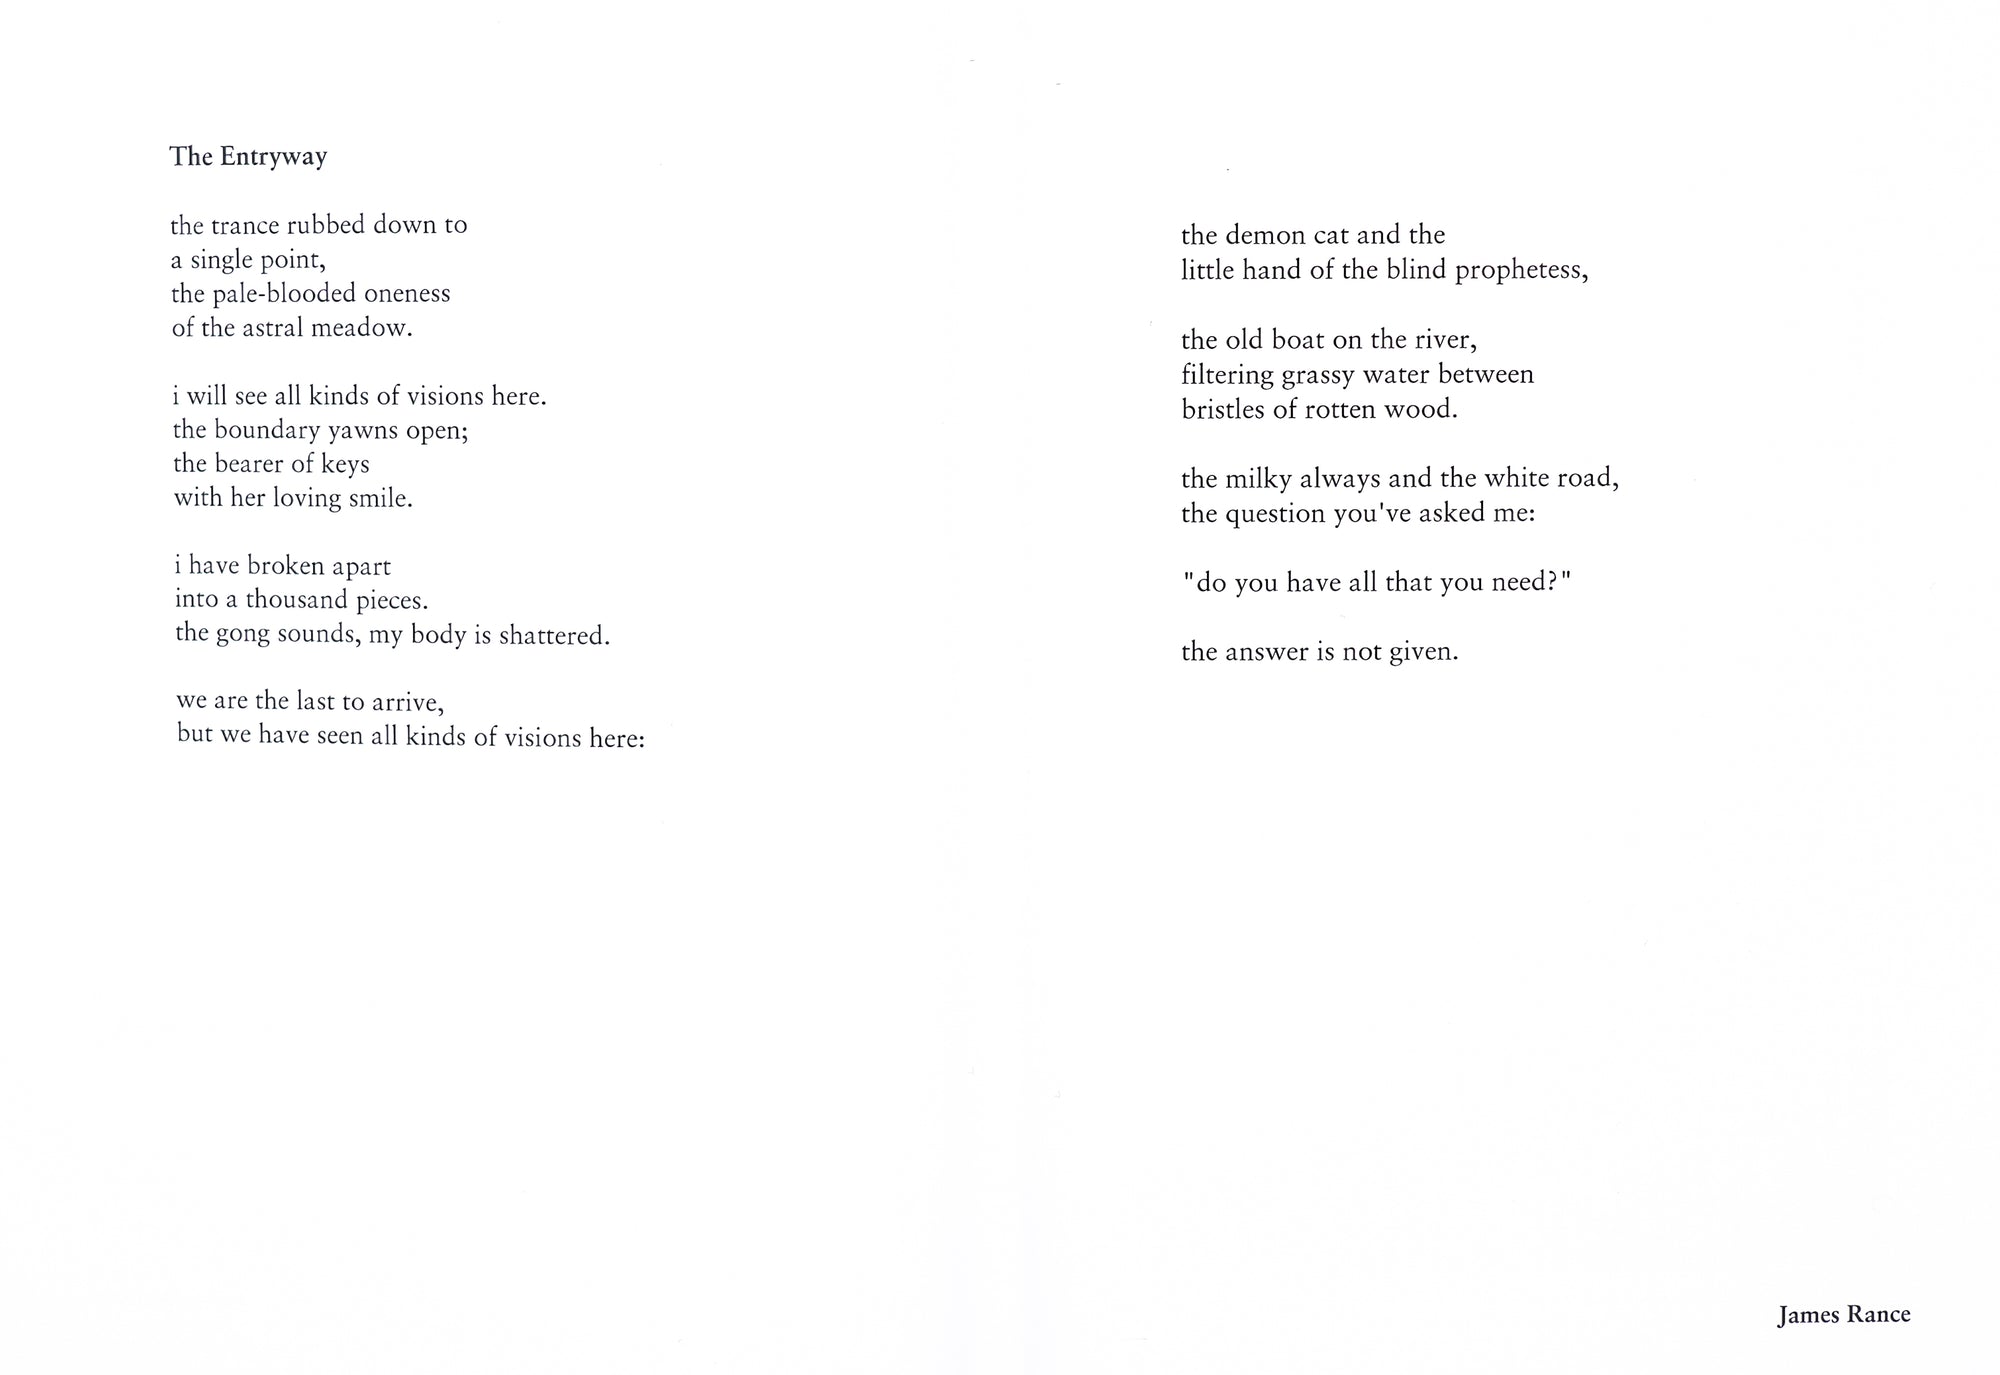 A double spread showing, black on white, a poem titled 'The Entryway' by James Rance across both pages.